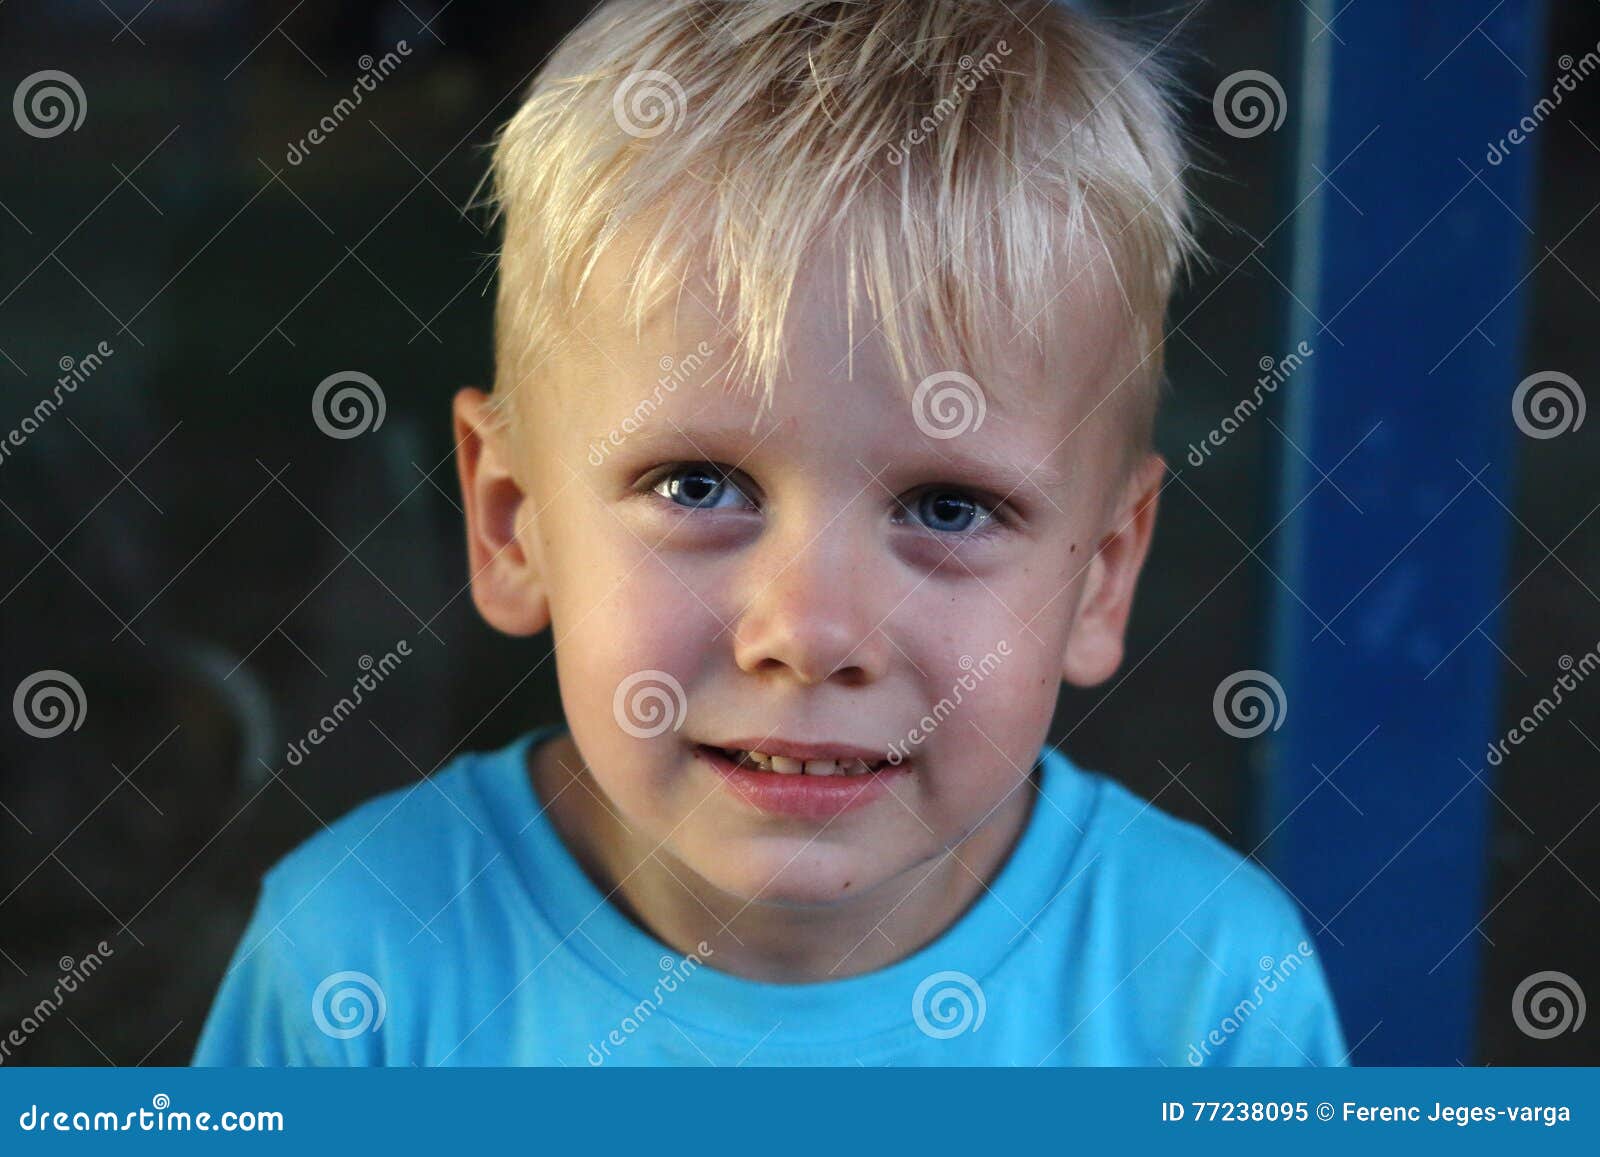 4. Stylish little boy with blonde hair and trendy outfit - wide 7